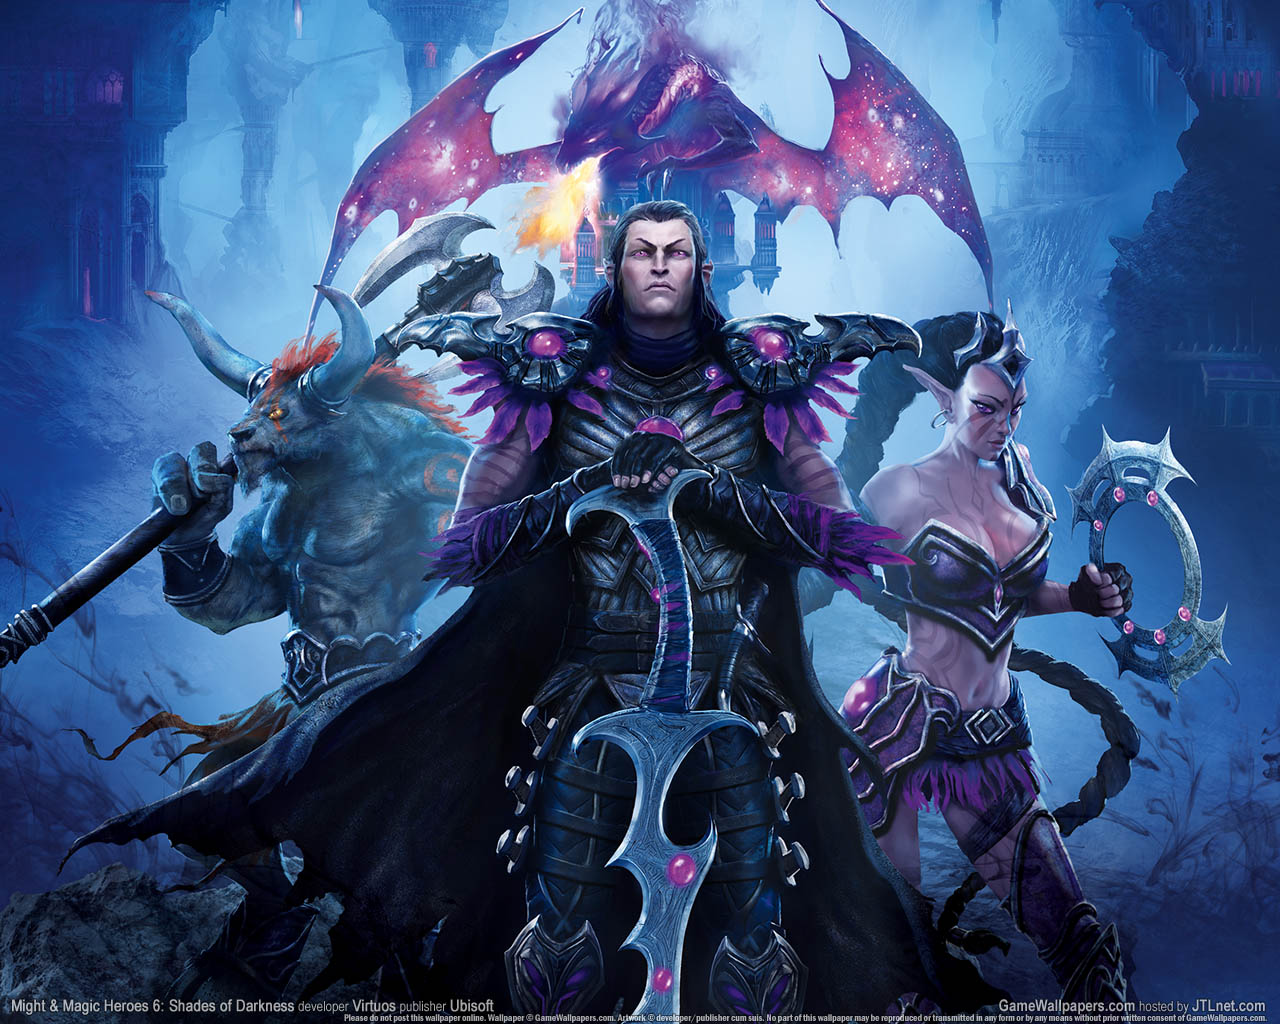 Might %2526 Magic Heroes 6%253A Shades of Darkness achtergrond 01 1280x1024